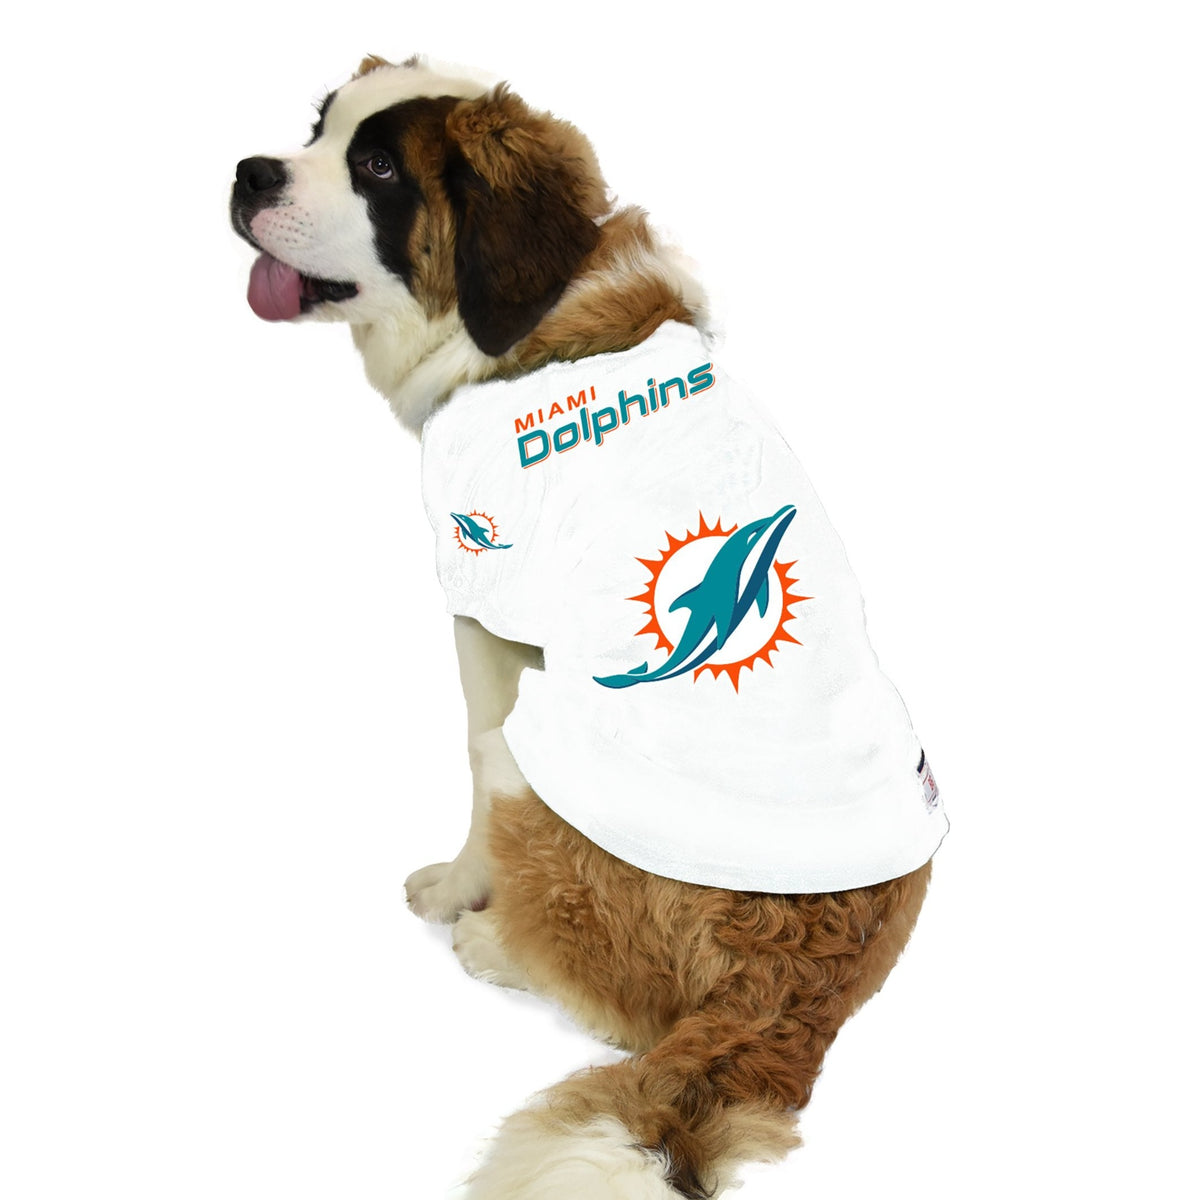 Miami Heat Dog Jersey- Officially Licensed NBA Pet Clothes at